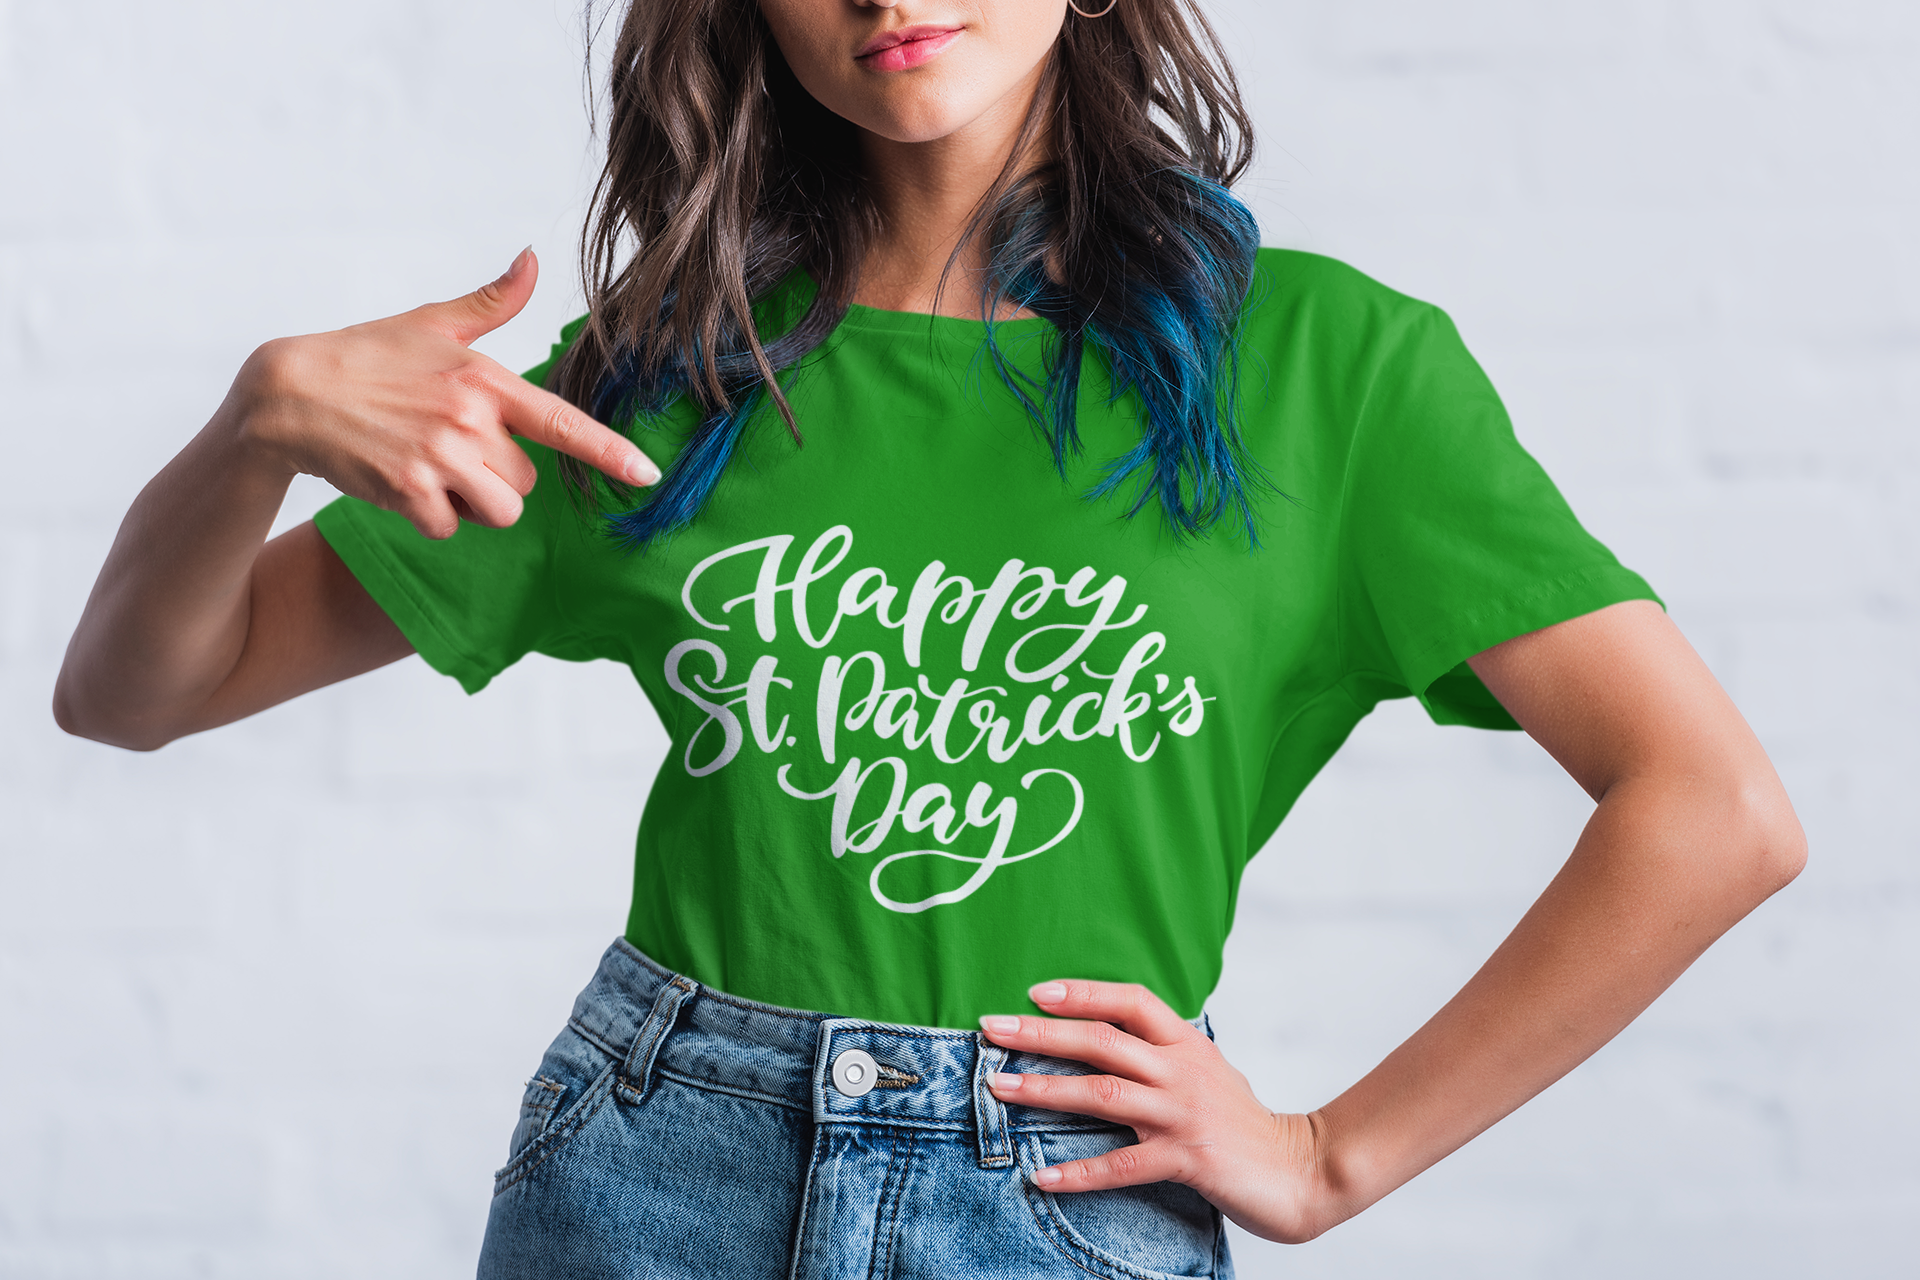 kelly green best color t-shirt